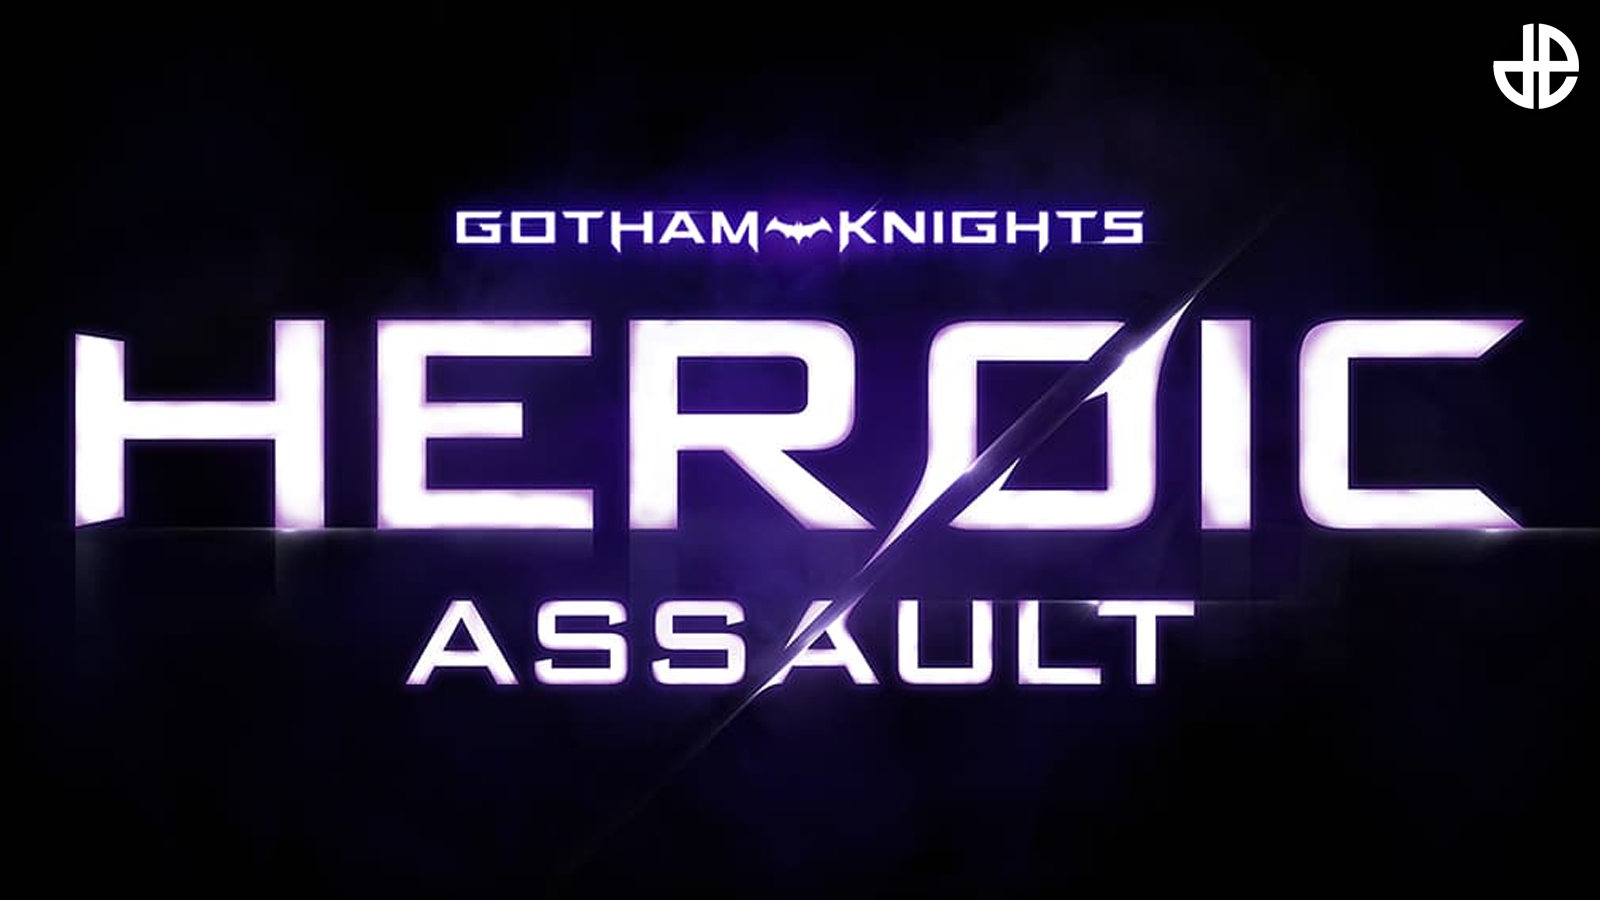 Gotham Knights Heroic Assault: Release date, platforms & everything we know